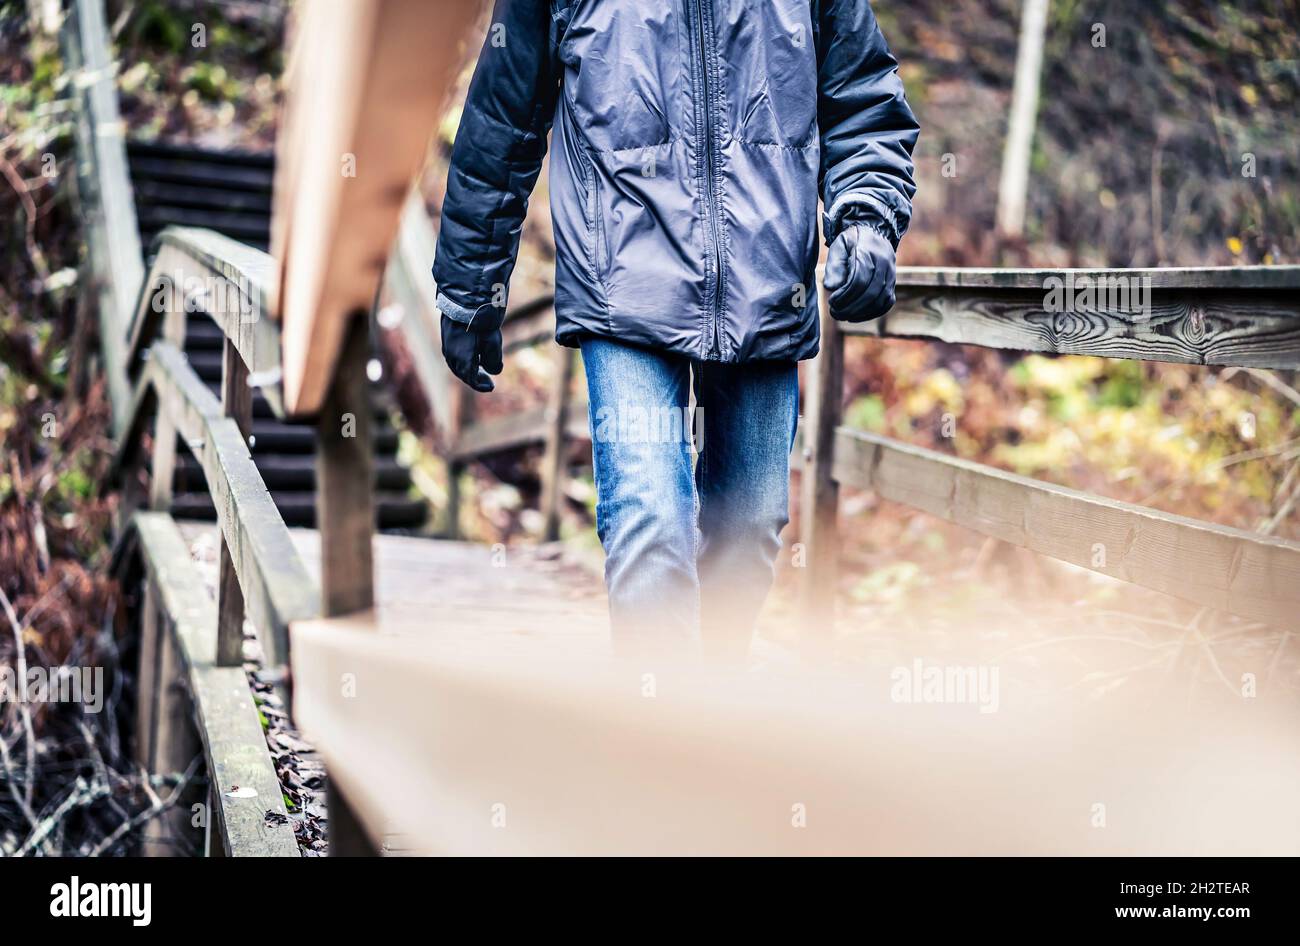 Autumn, winter, or fall walk in forest. Man on a wooden trail, path or bridge. Happy hiker with jacket and jeans enjoying outdoor fun. Stock Photo